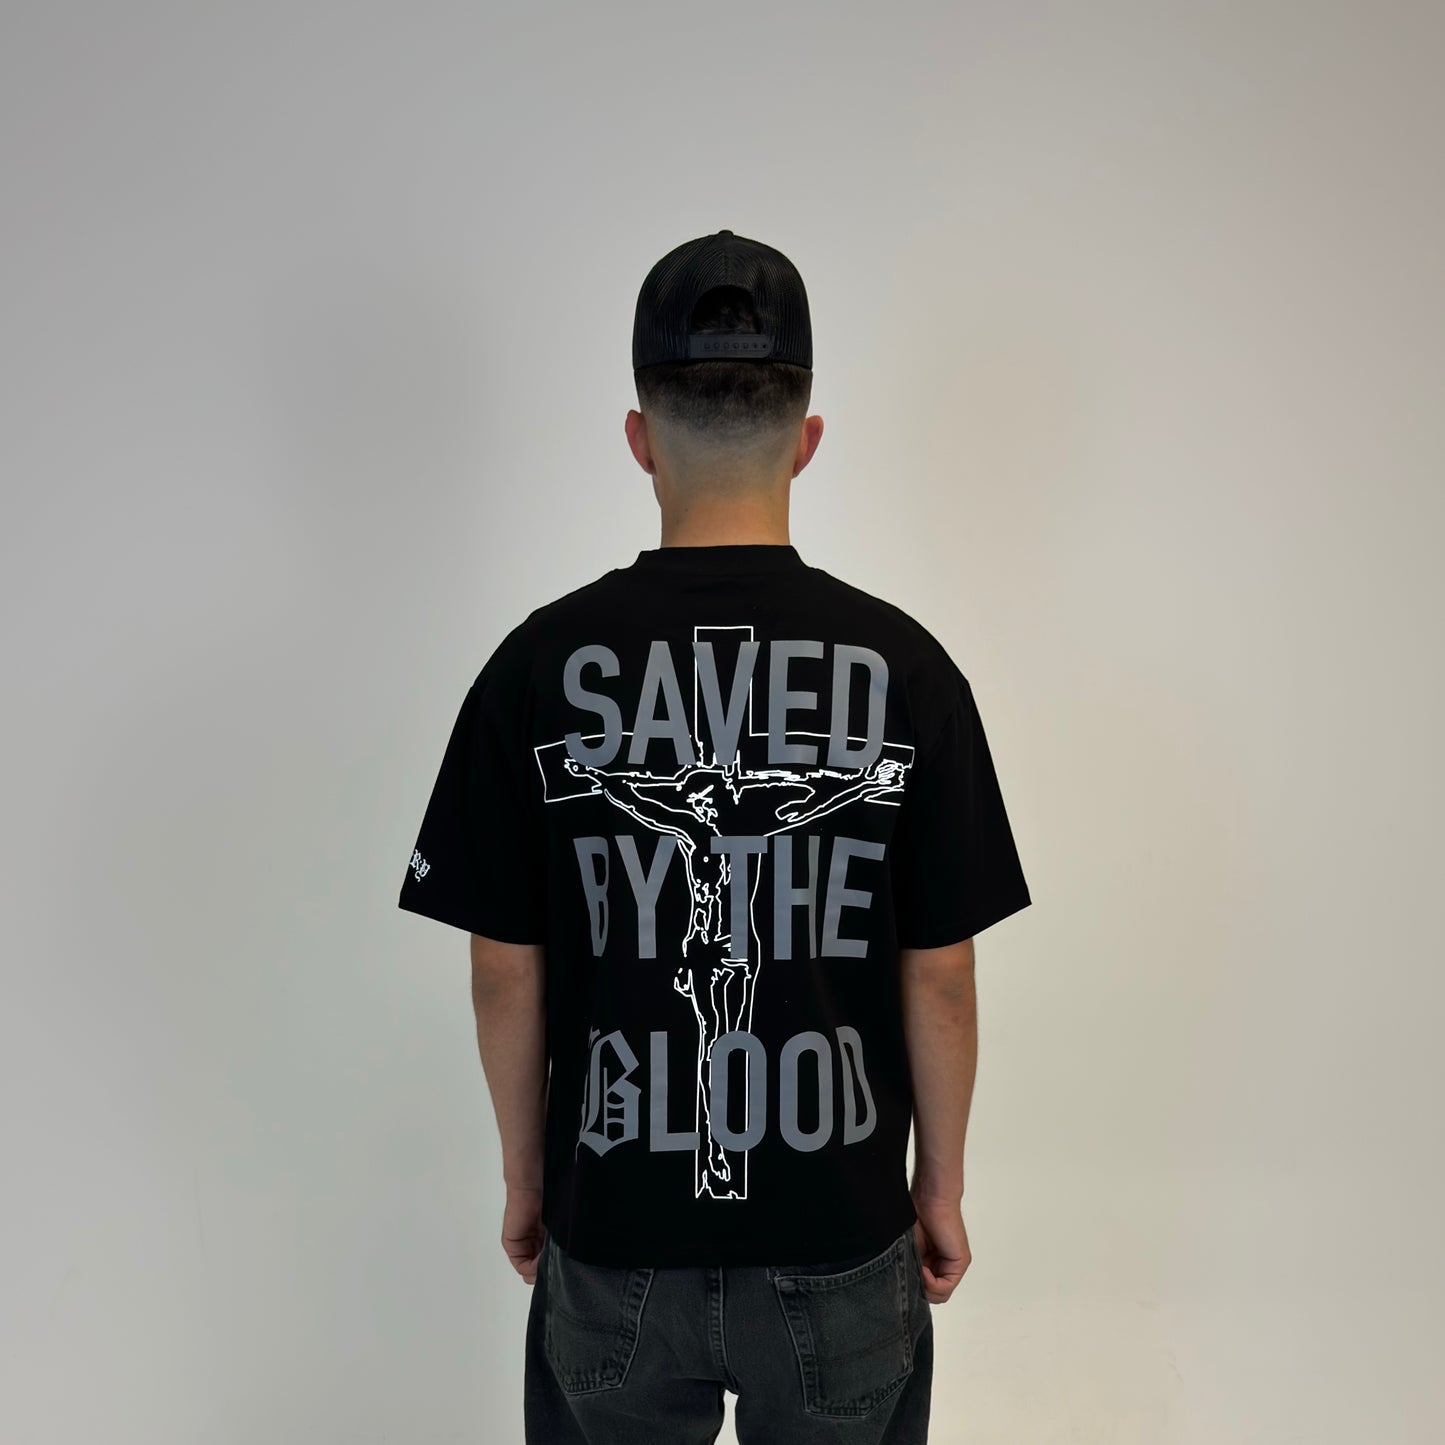 Saved By The Blood Tee - Black / Grey